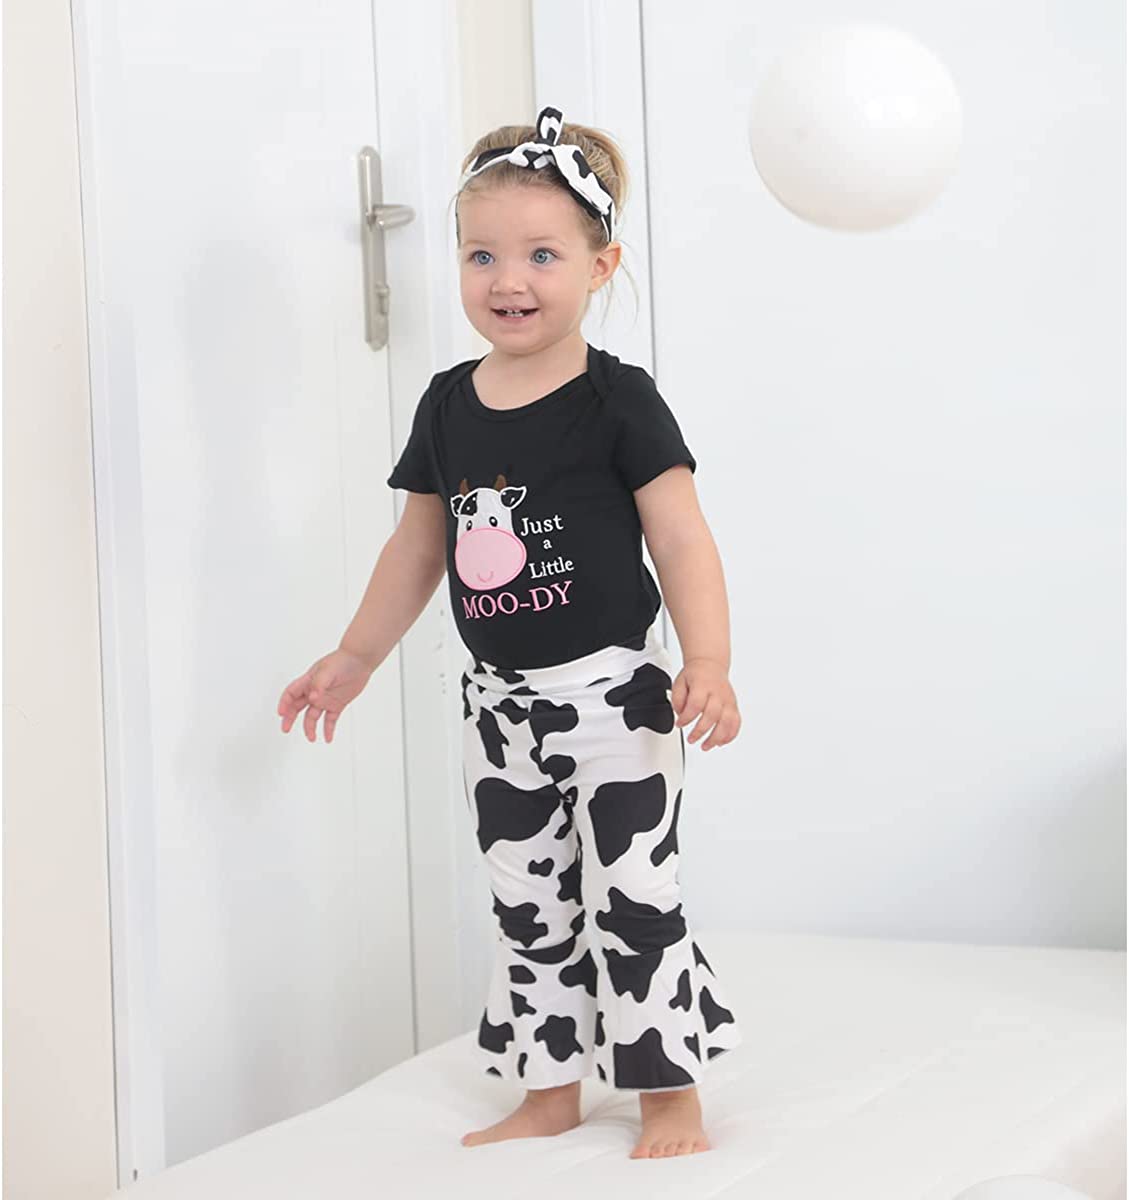 Baby Girl Cow Print Outfit Infant Cow Clothes for Girls Baby Bell Bottom Outfit